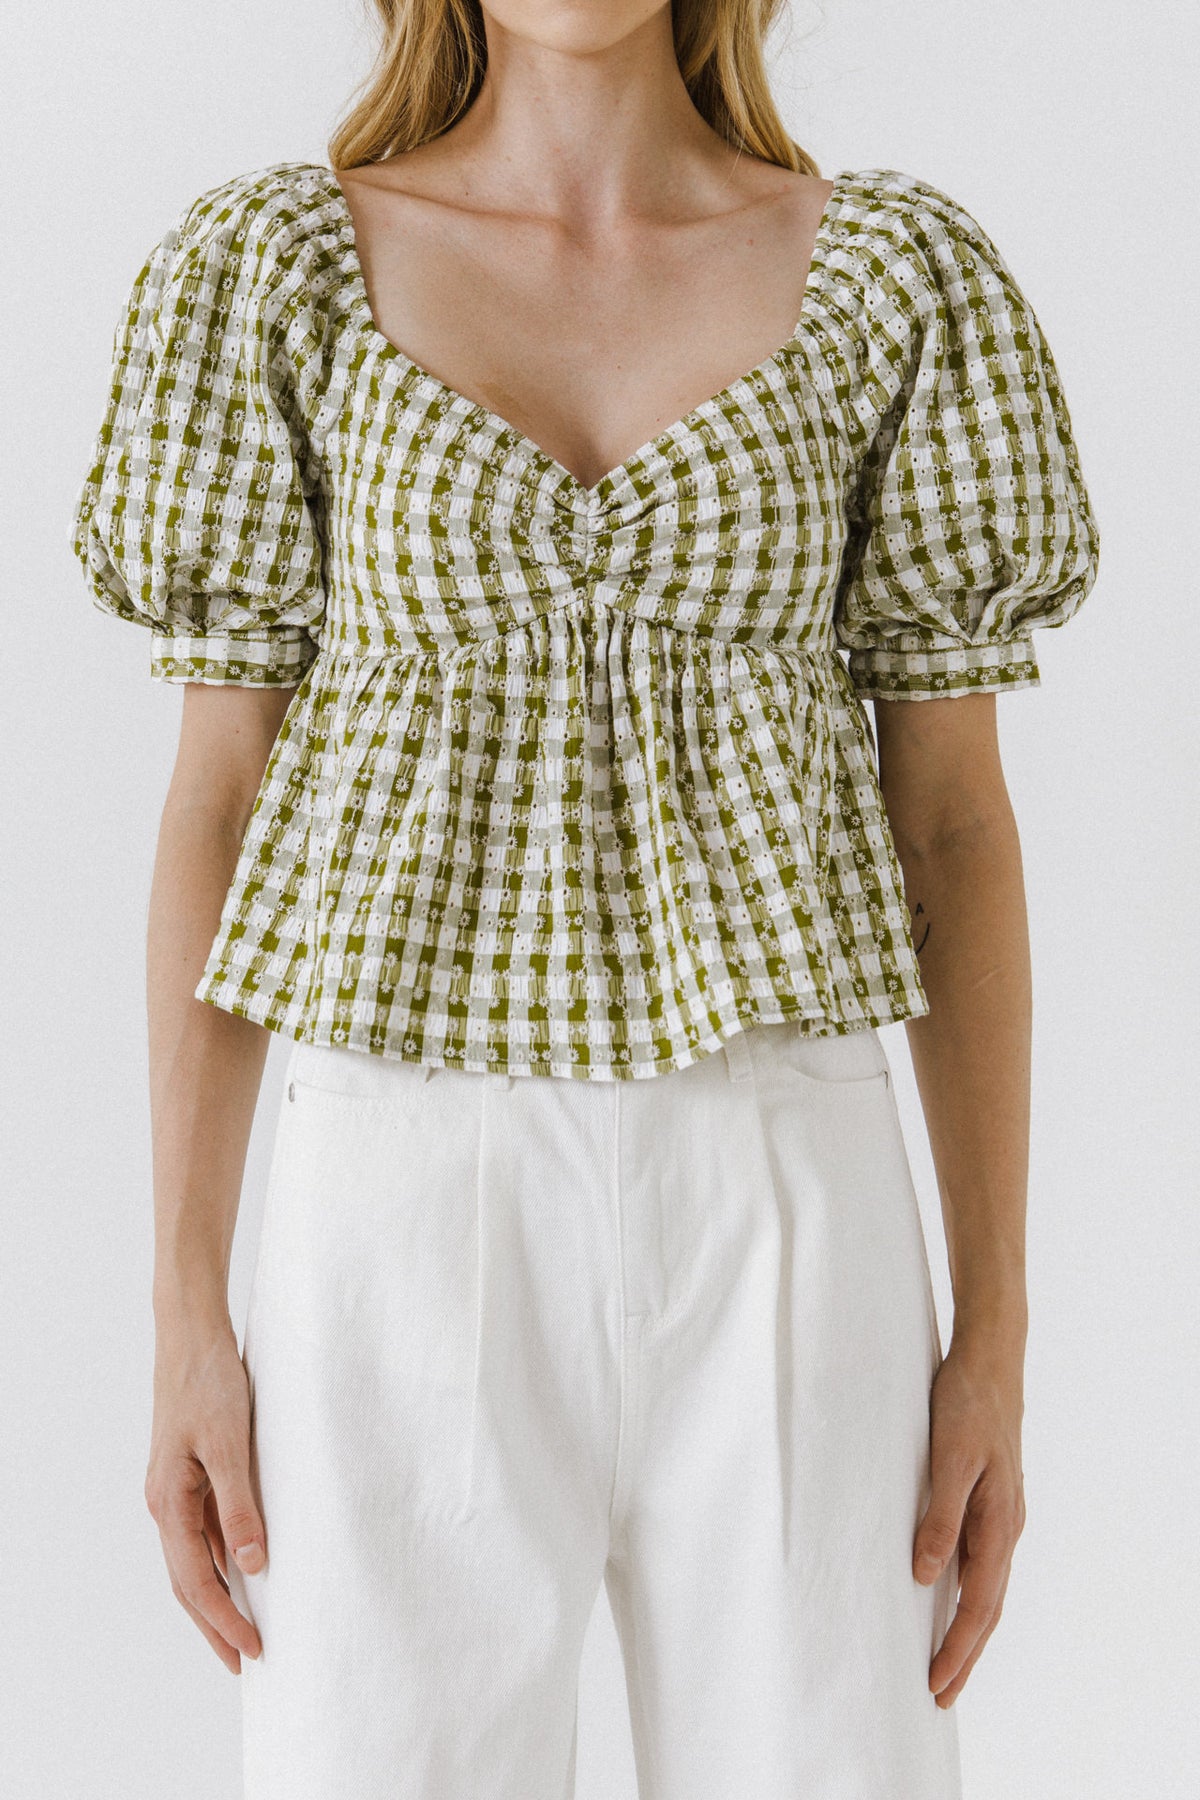 FREE THE ROSES - Gingham Check Top with Emboridery - TOPS available at Objectrare